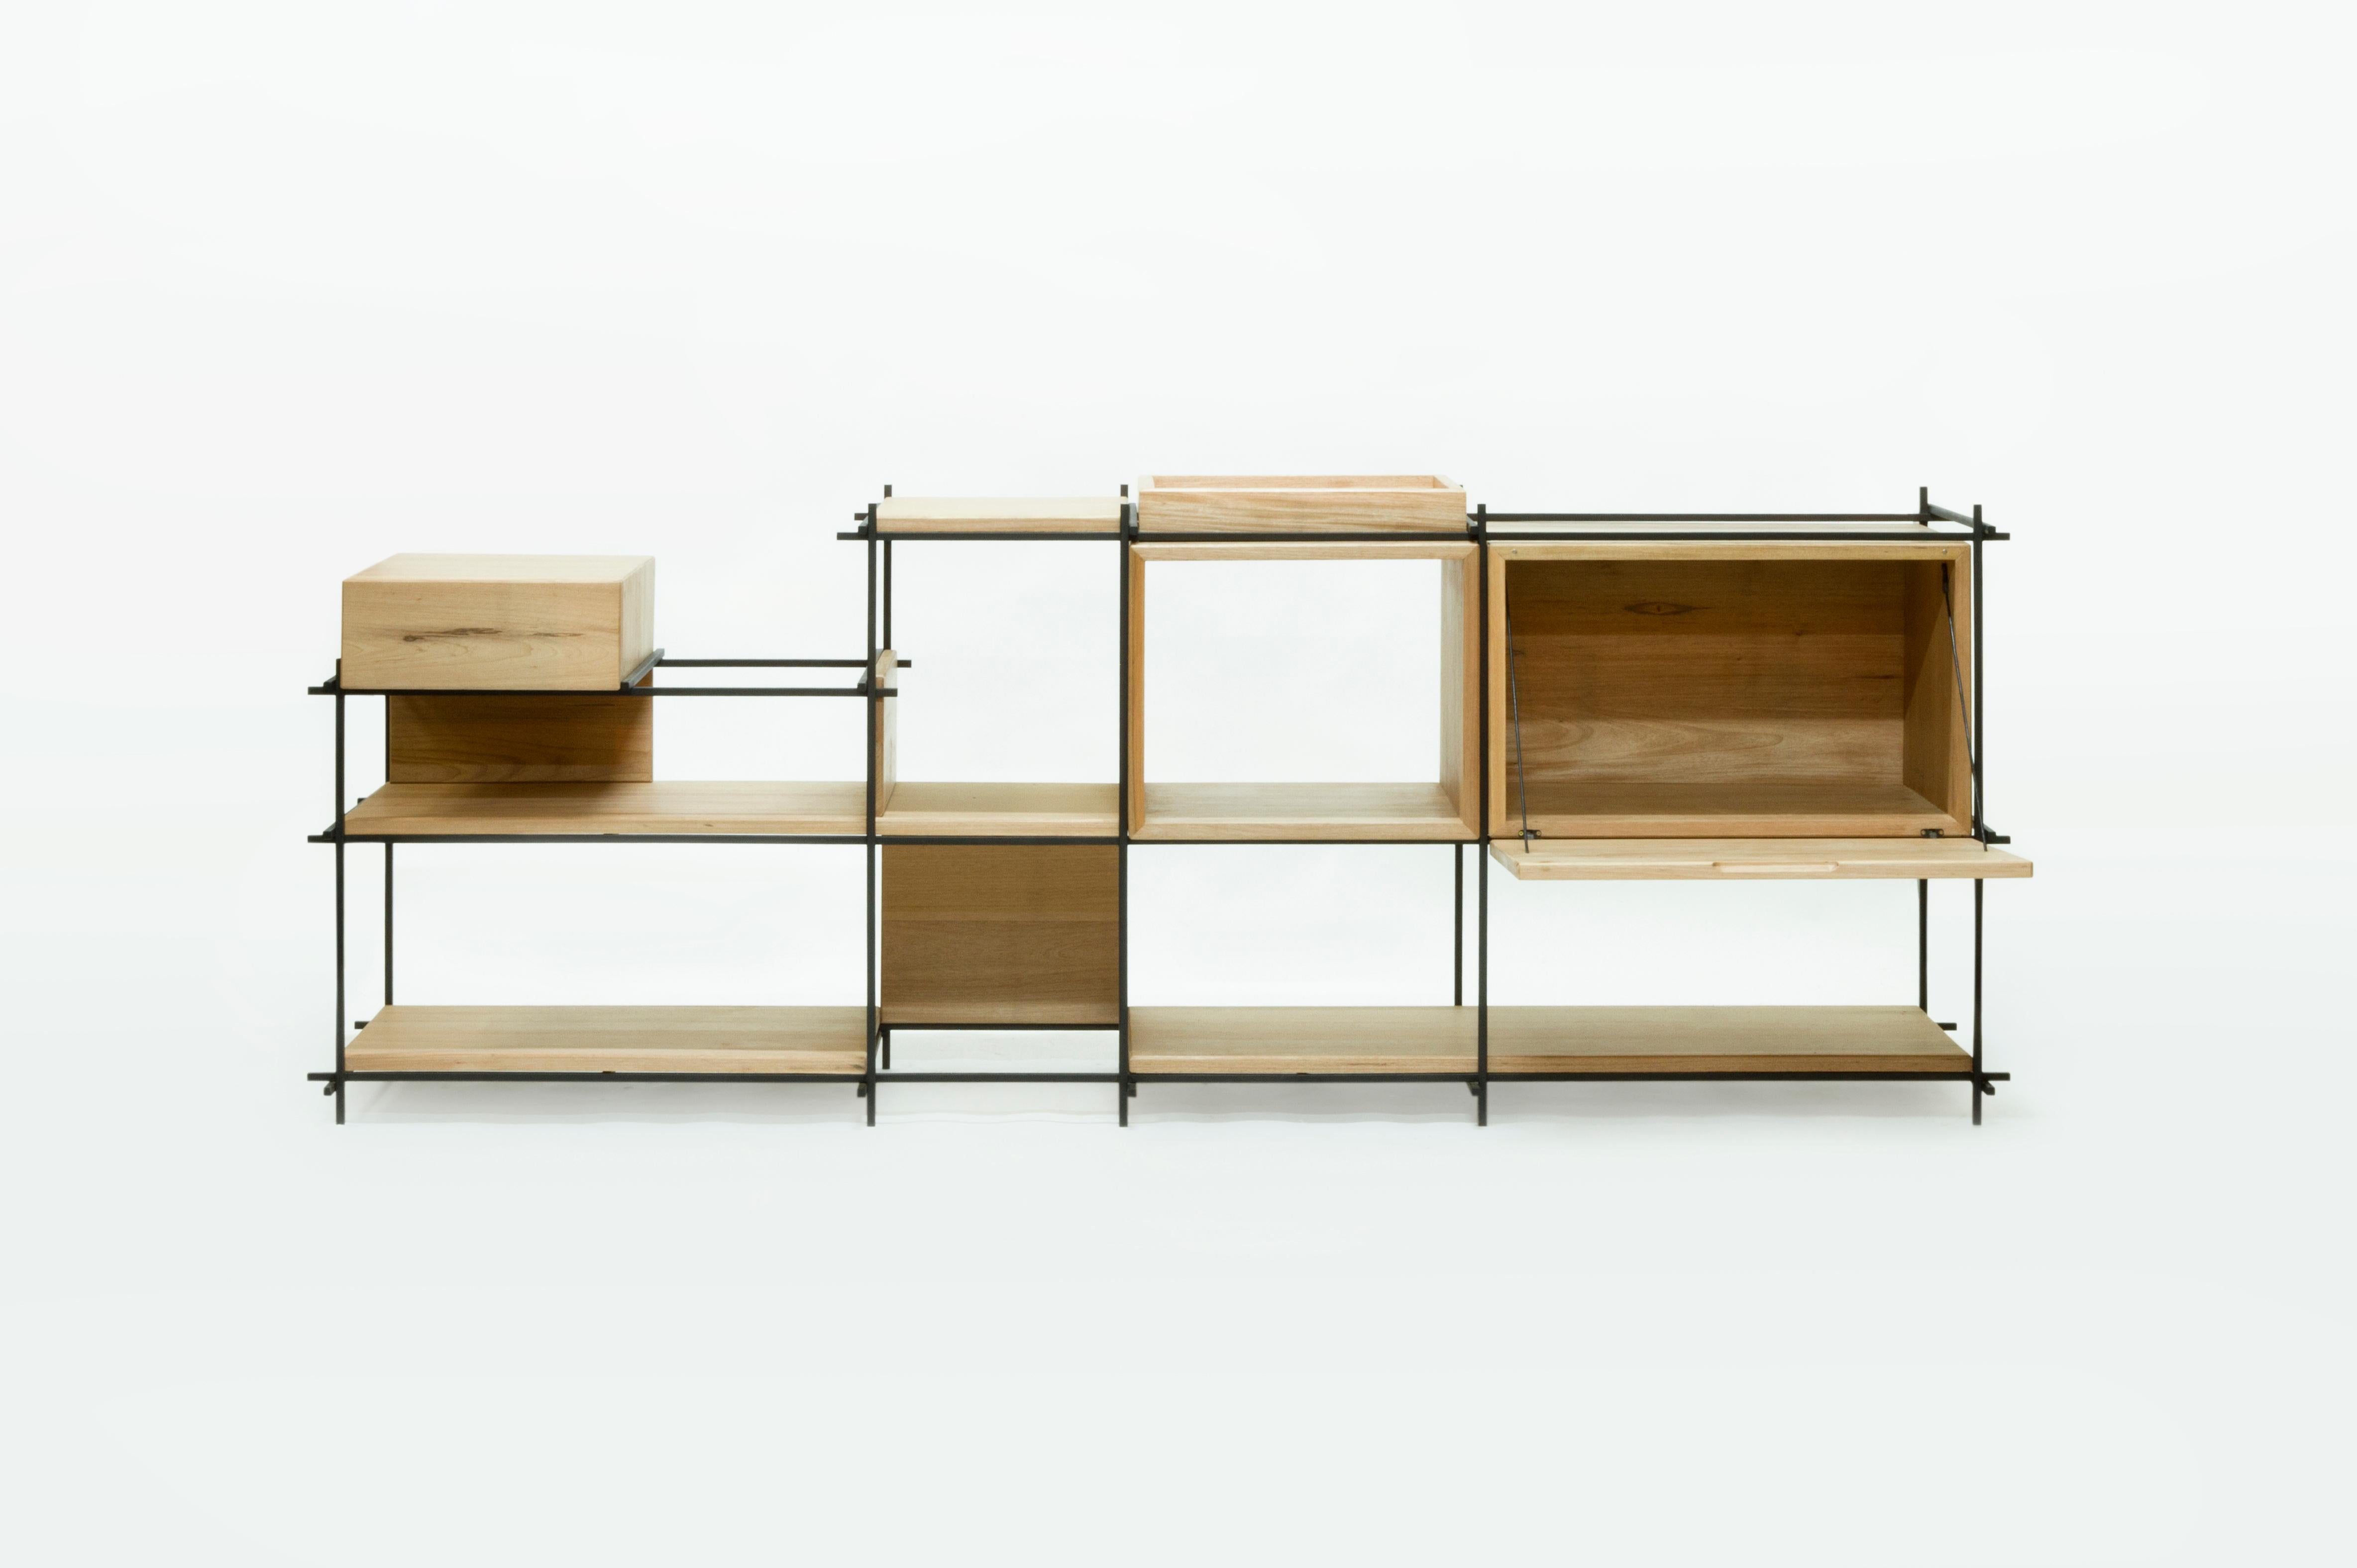 Painted Sideboard in Hardwood and Steel, Brazilian Contemporary Design by O Formigueiro For Sale